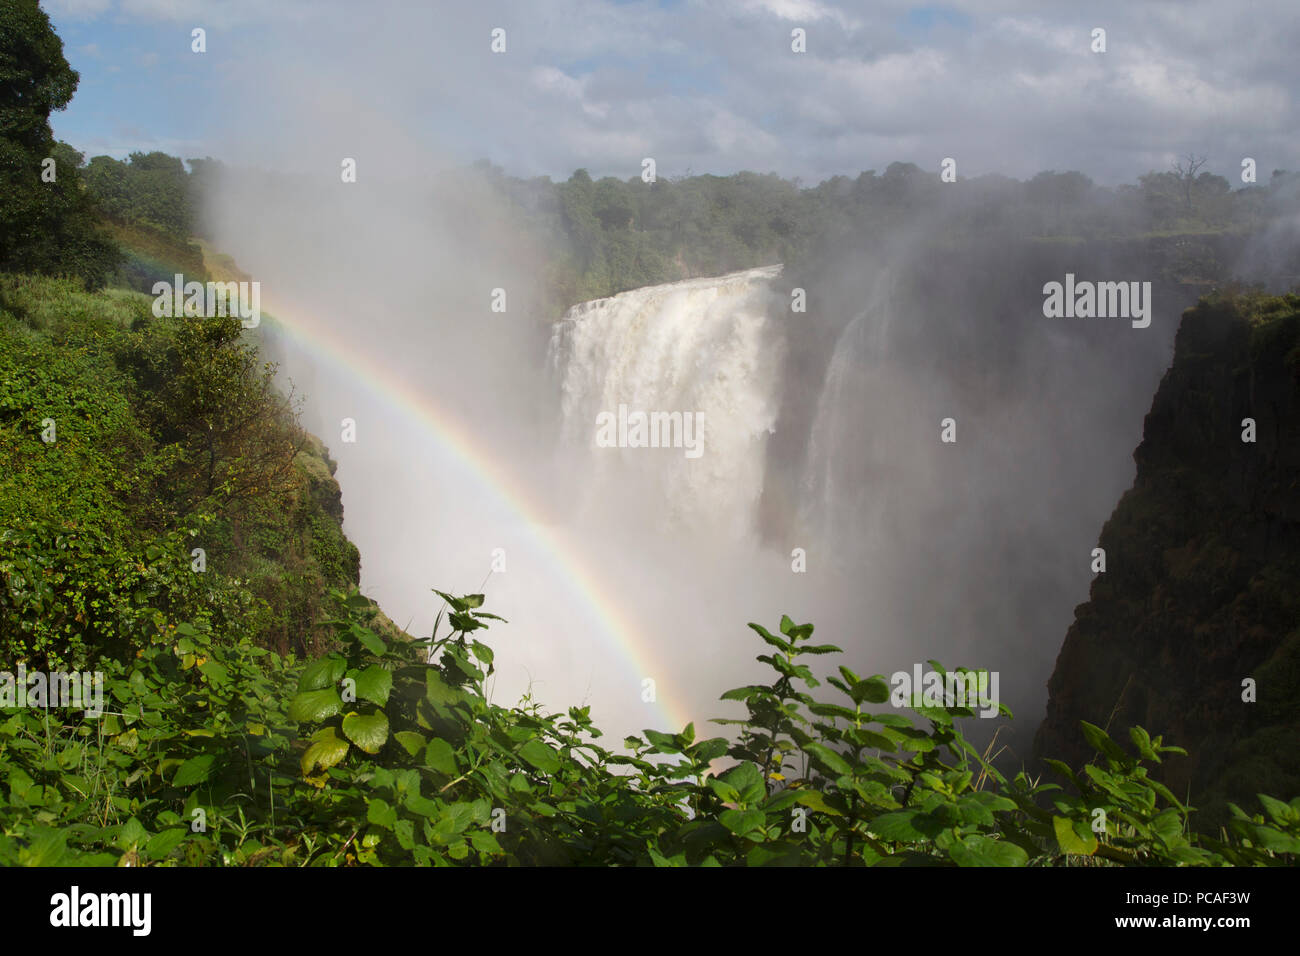 A rainbow in spray by the Victoria Falls waterfall (Mosi-oa-Tunya), UNESCO World Heritage Site, on the border of Zimbabwe and Zambia, Africa Stock Photo